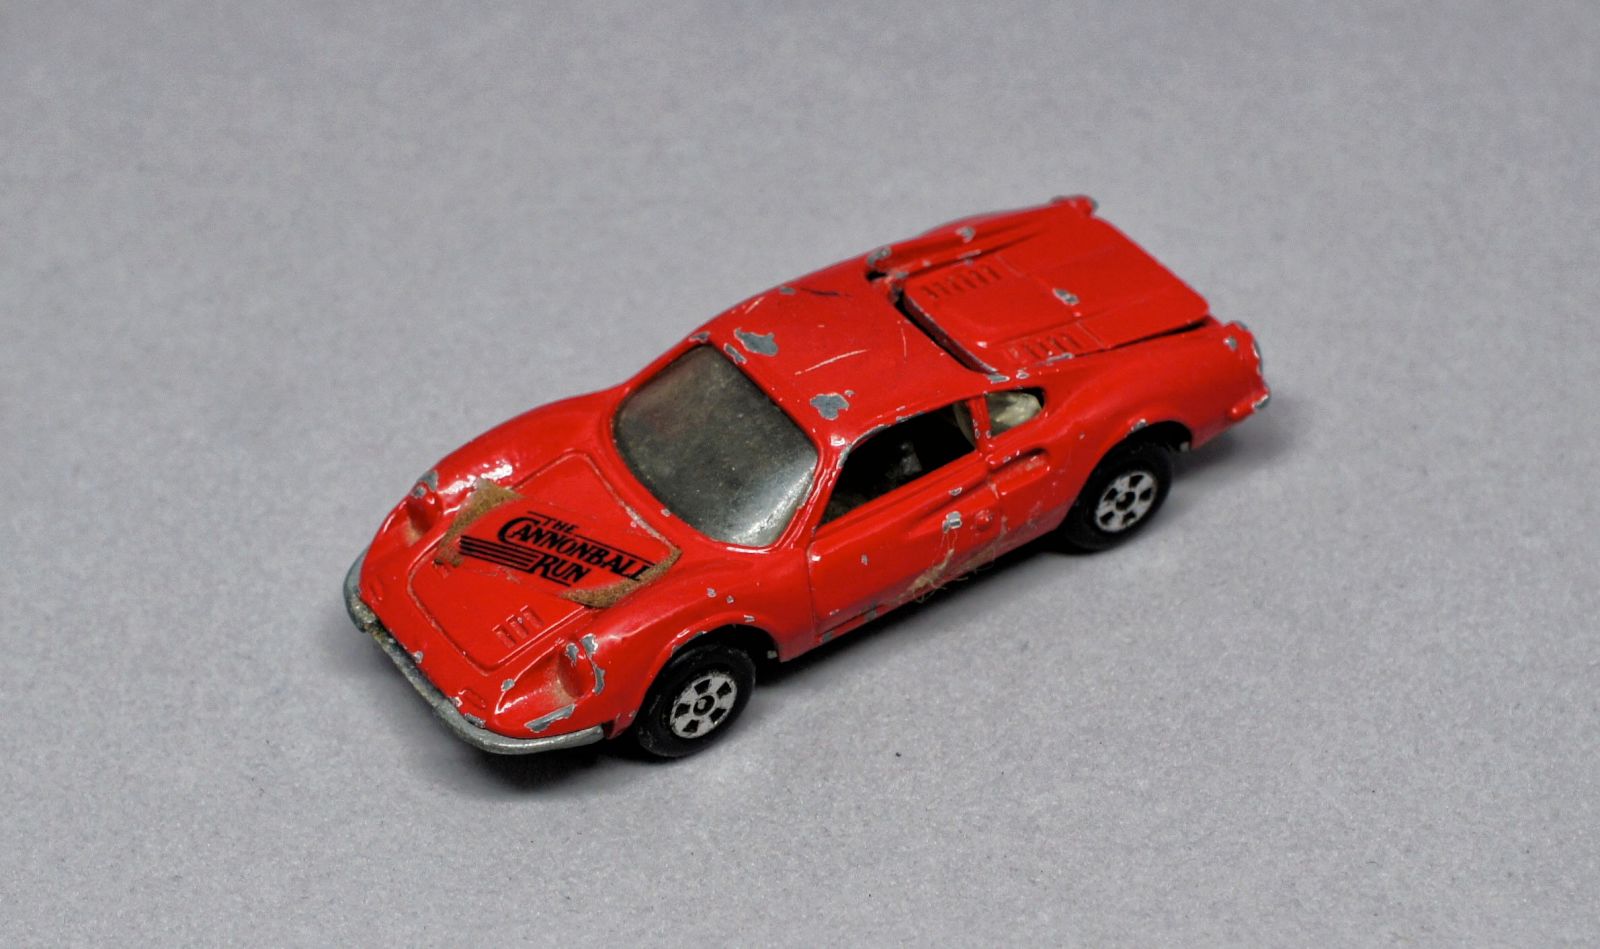 One of the added bonusses, an ERTL Dino 246GT